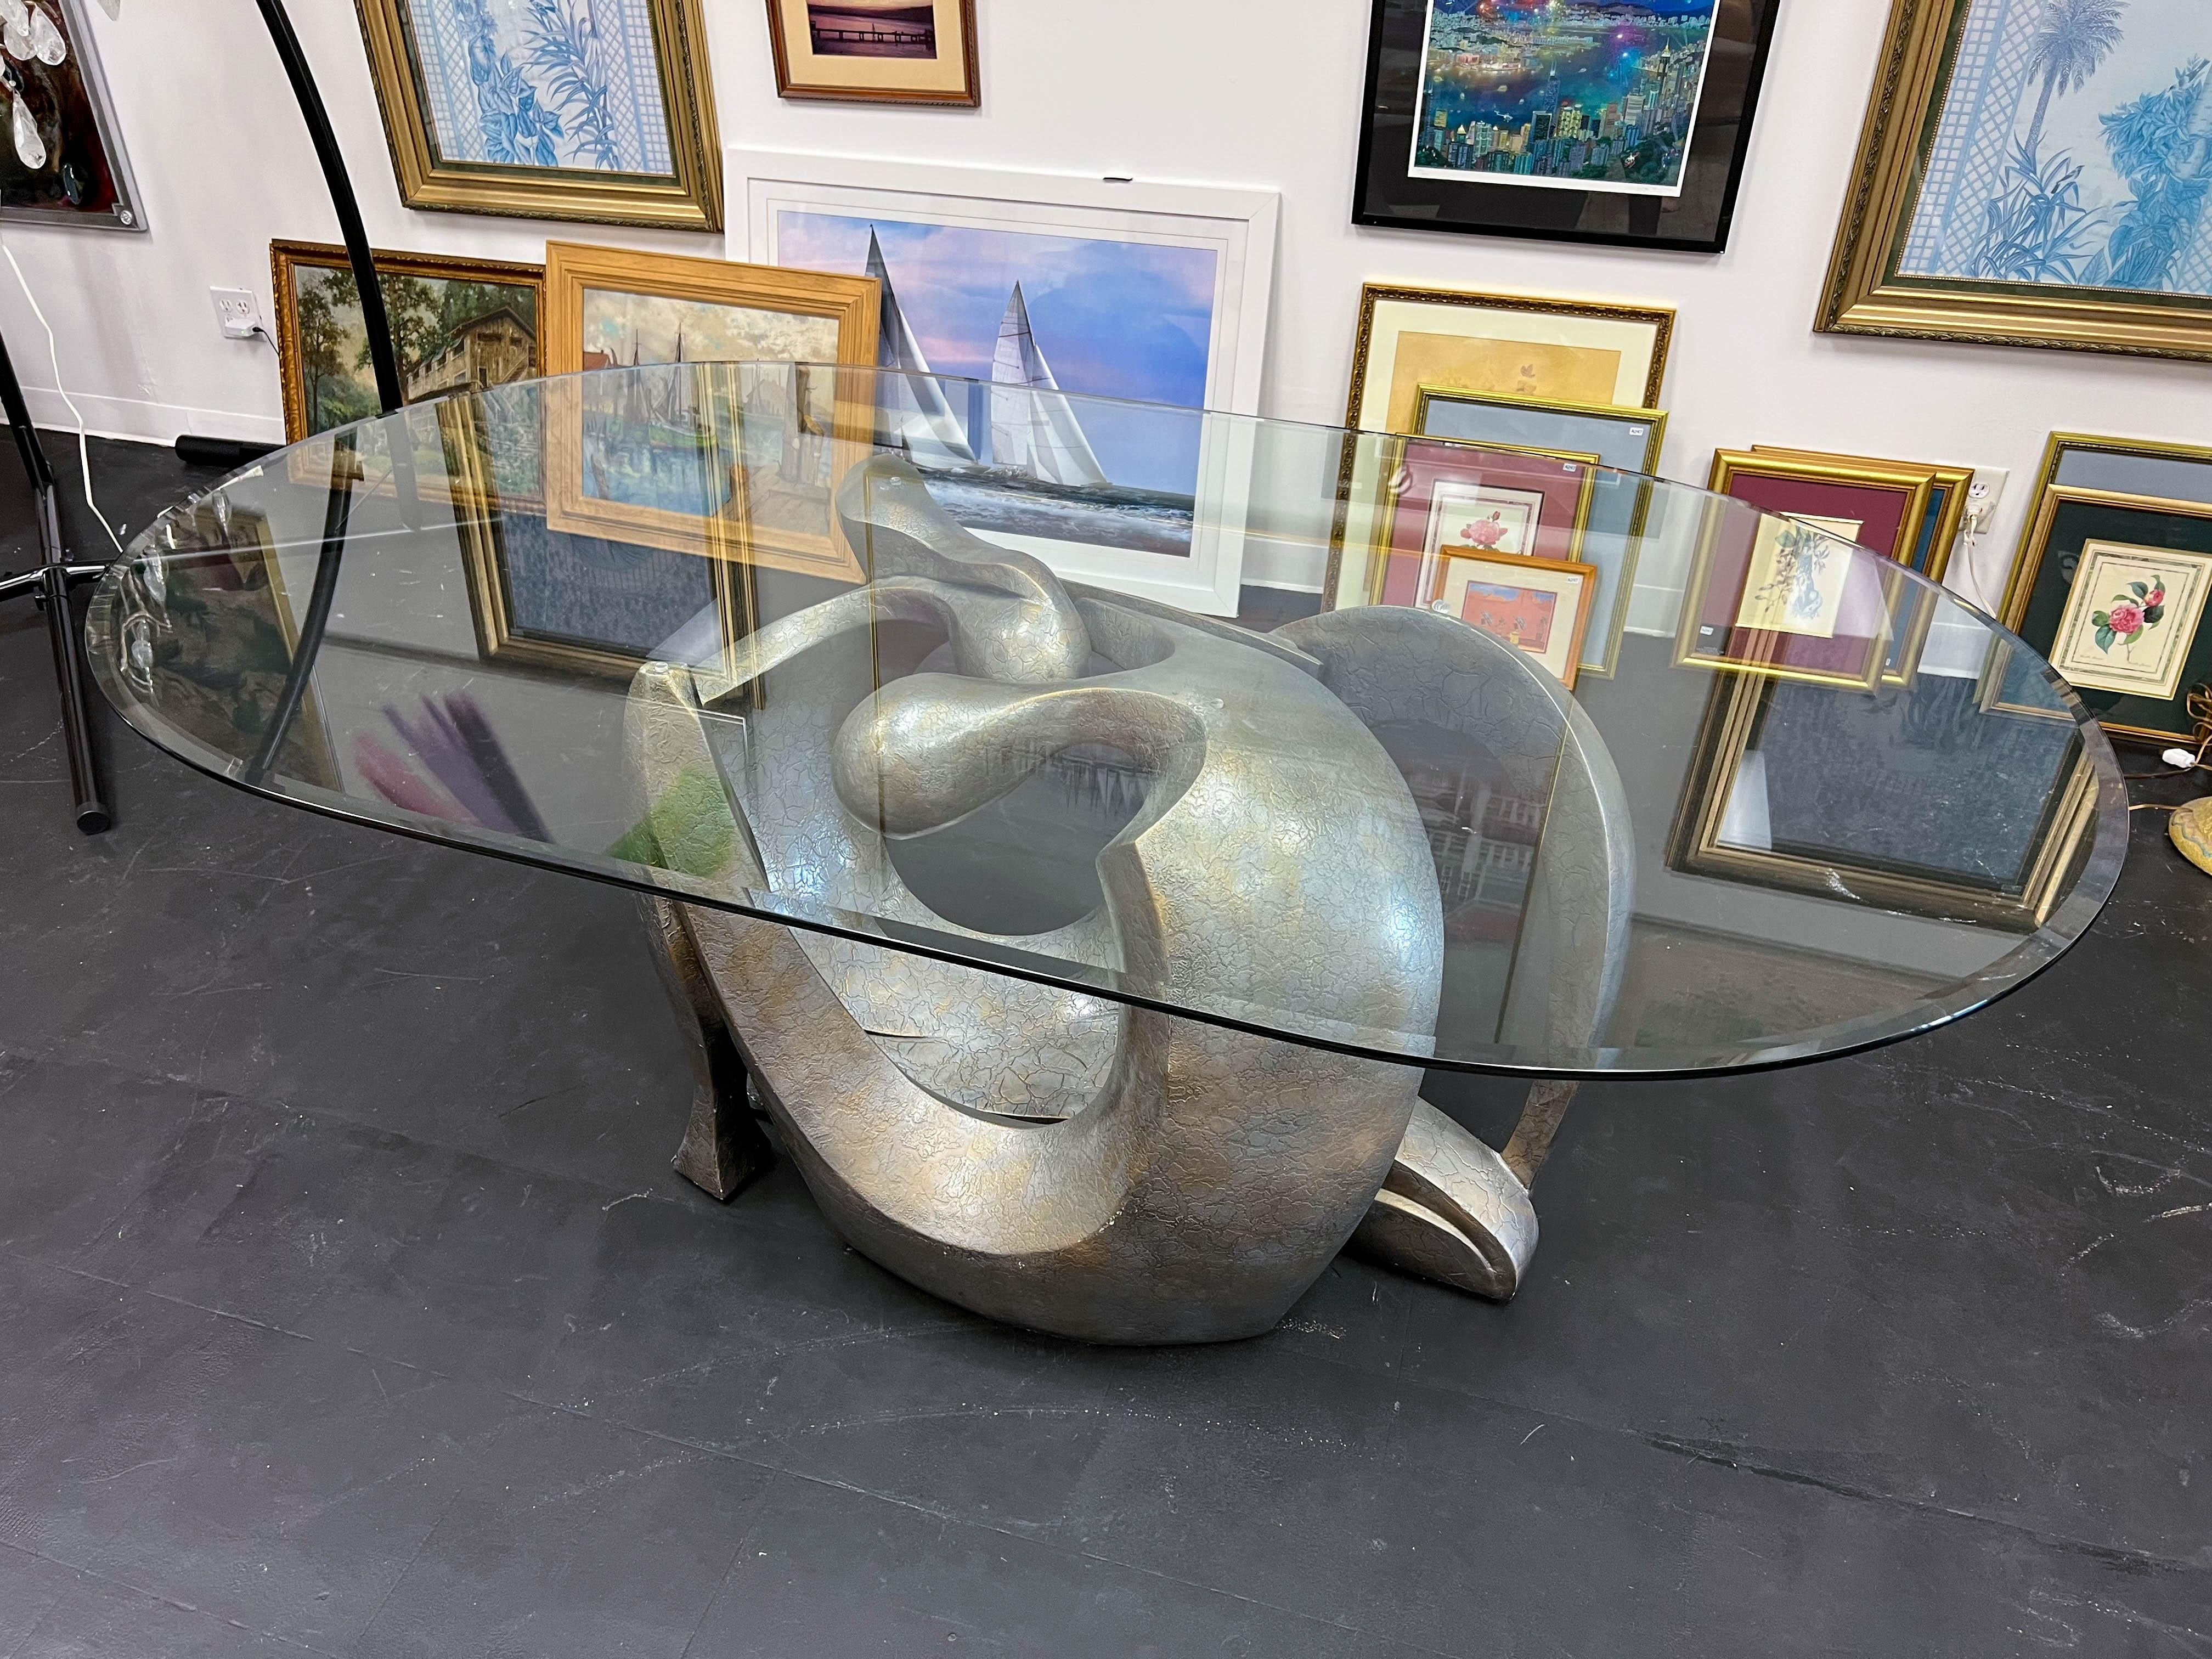 The abstract table base consists of two intertwined figures, evoking the union between male and female. Textured and finished in silver with delicate hints of gold, the base fabricated of composite is topped with an oval-shaped beveled glass. The